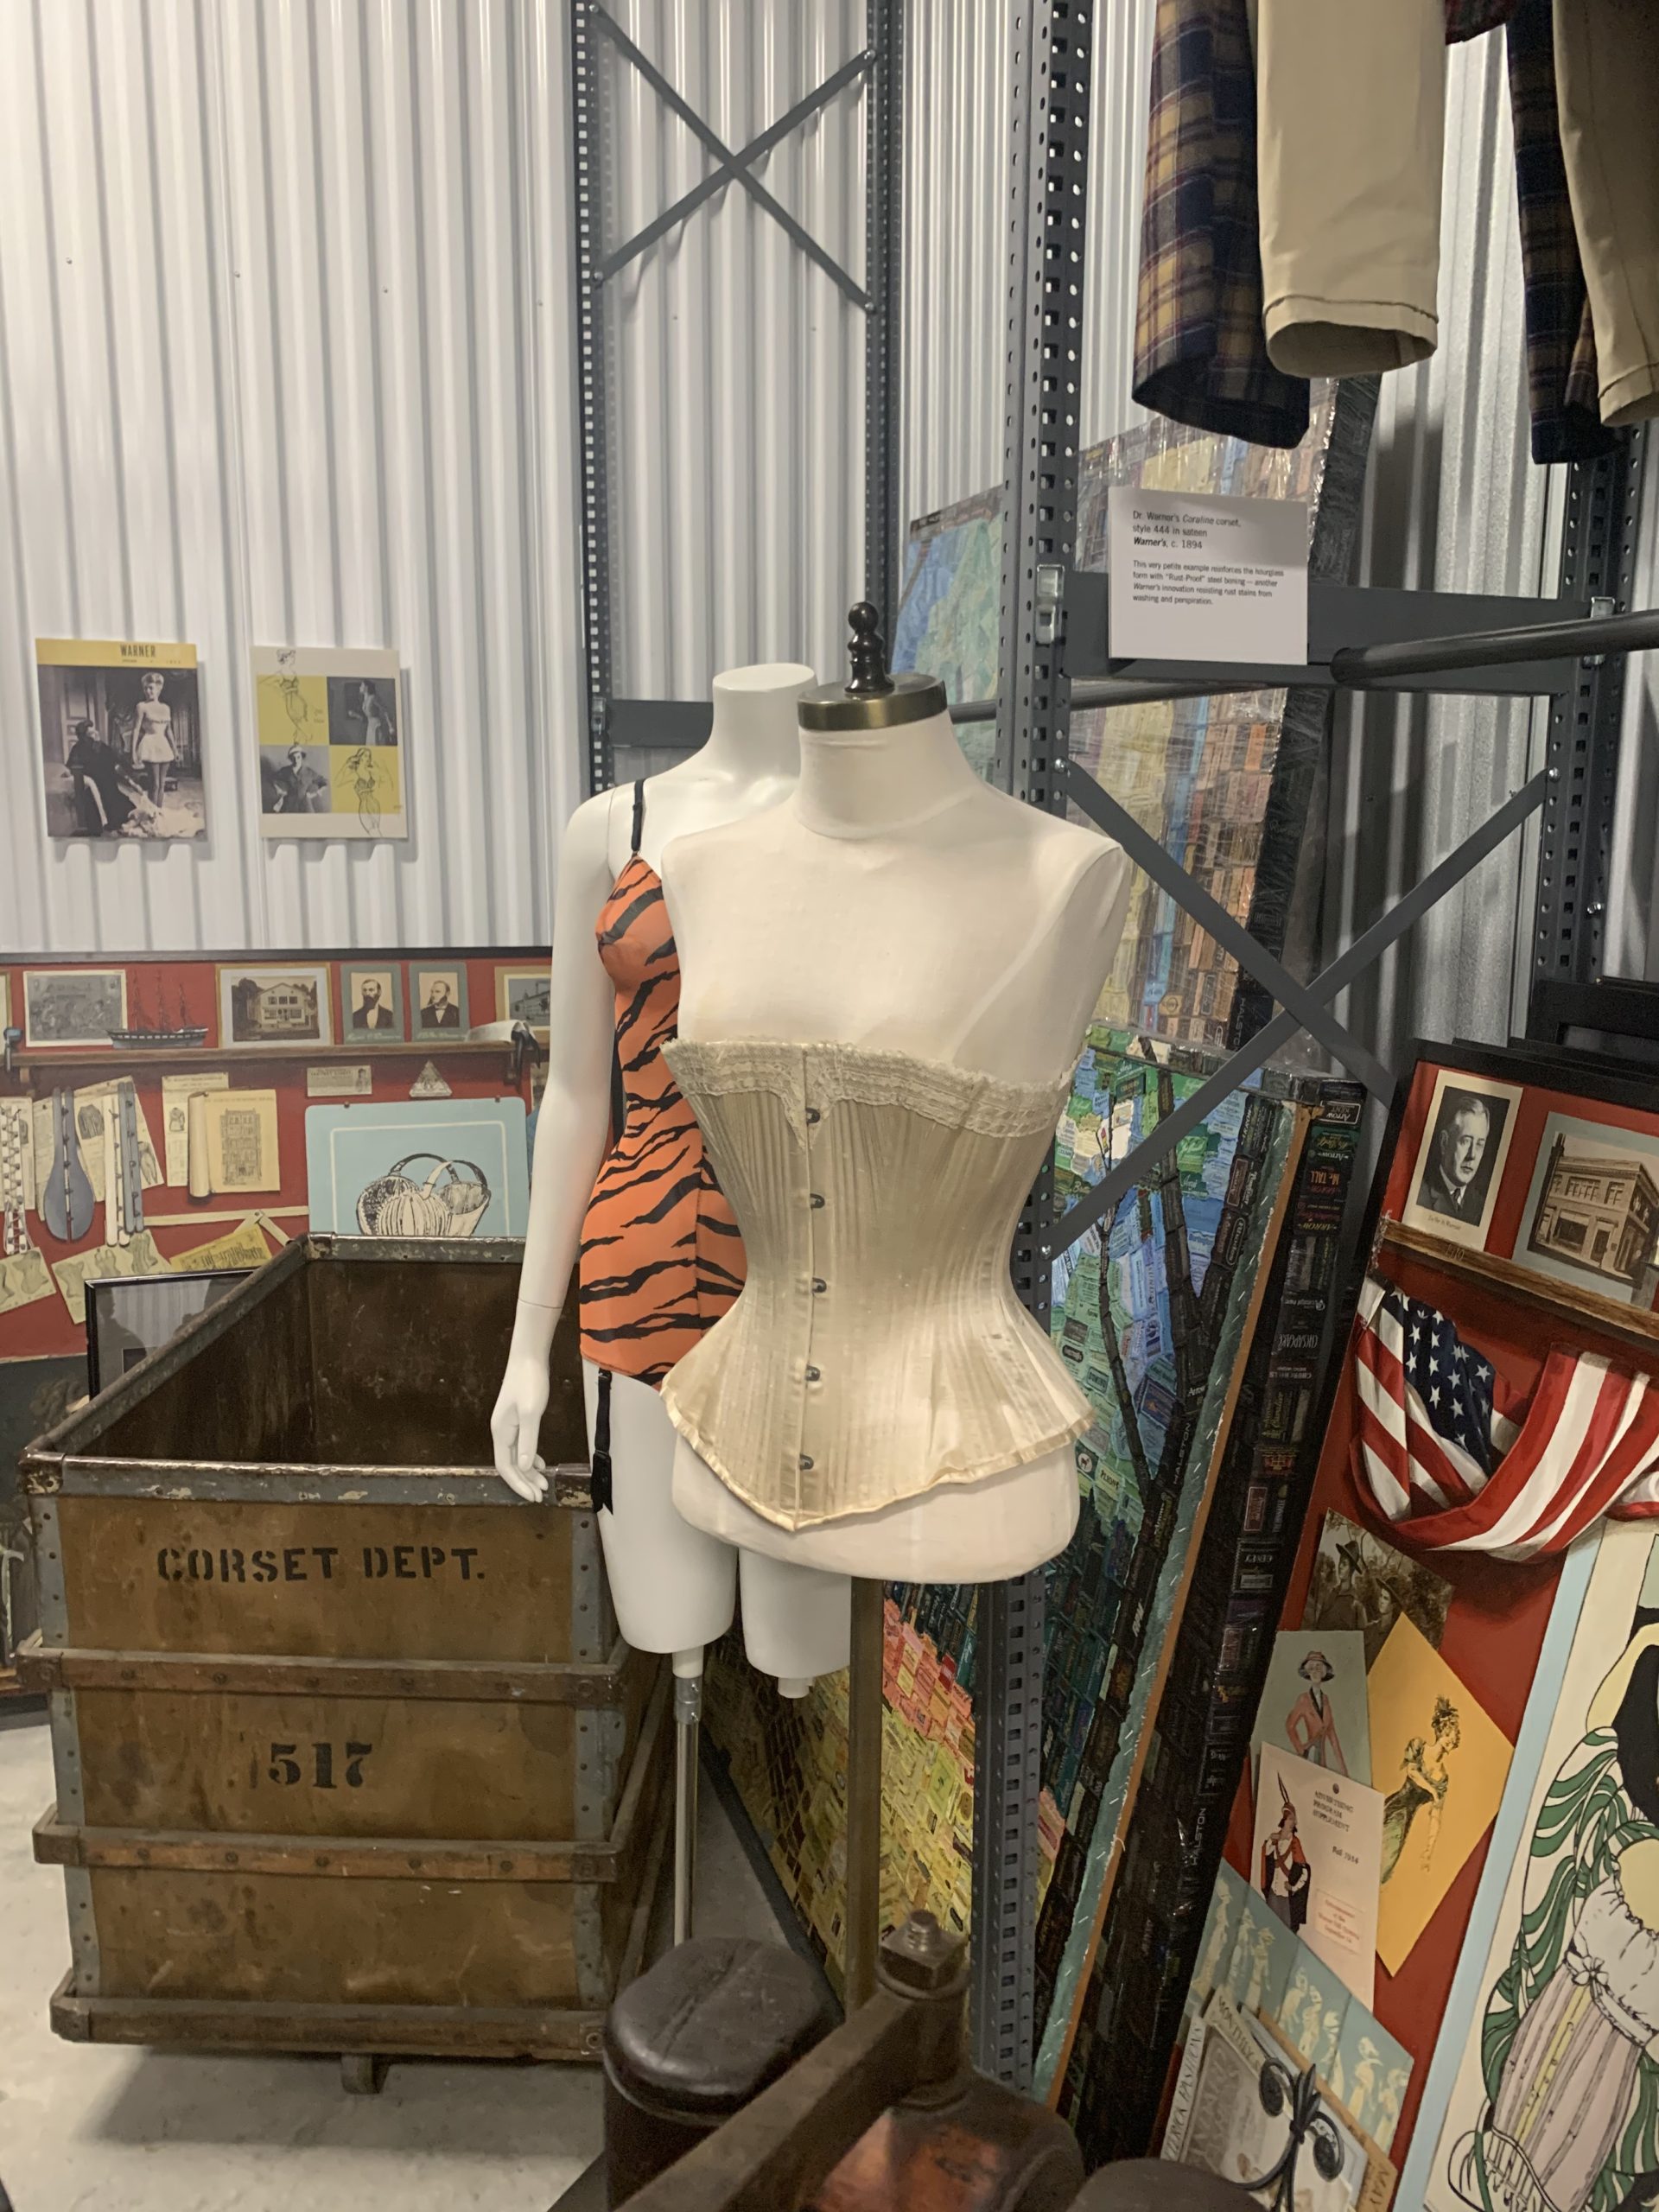 Dr. Warner's Properly Fitted Corset at the PVH Archive